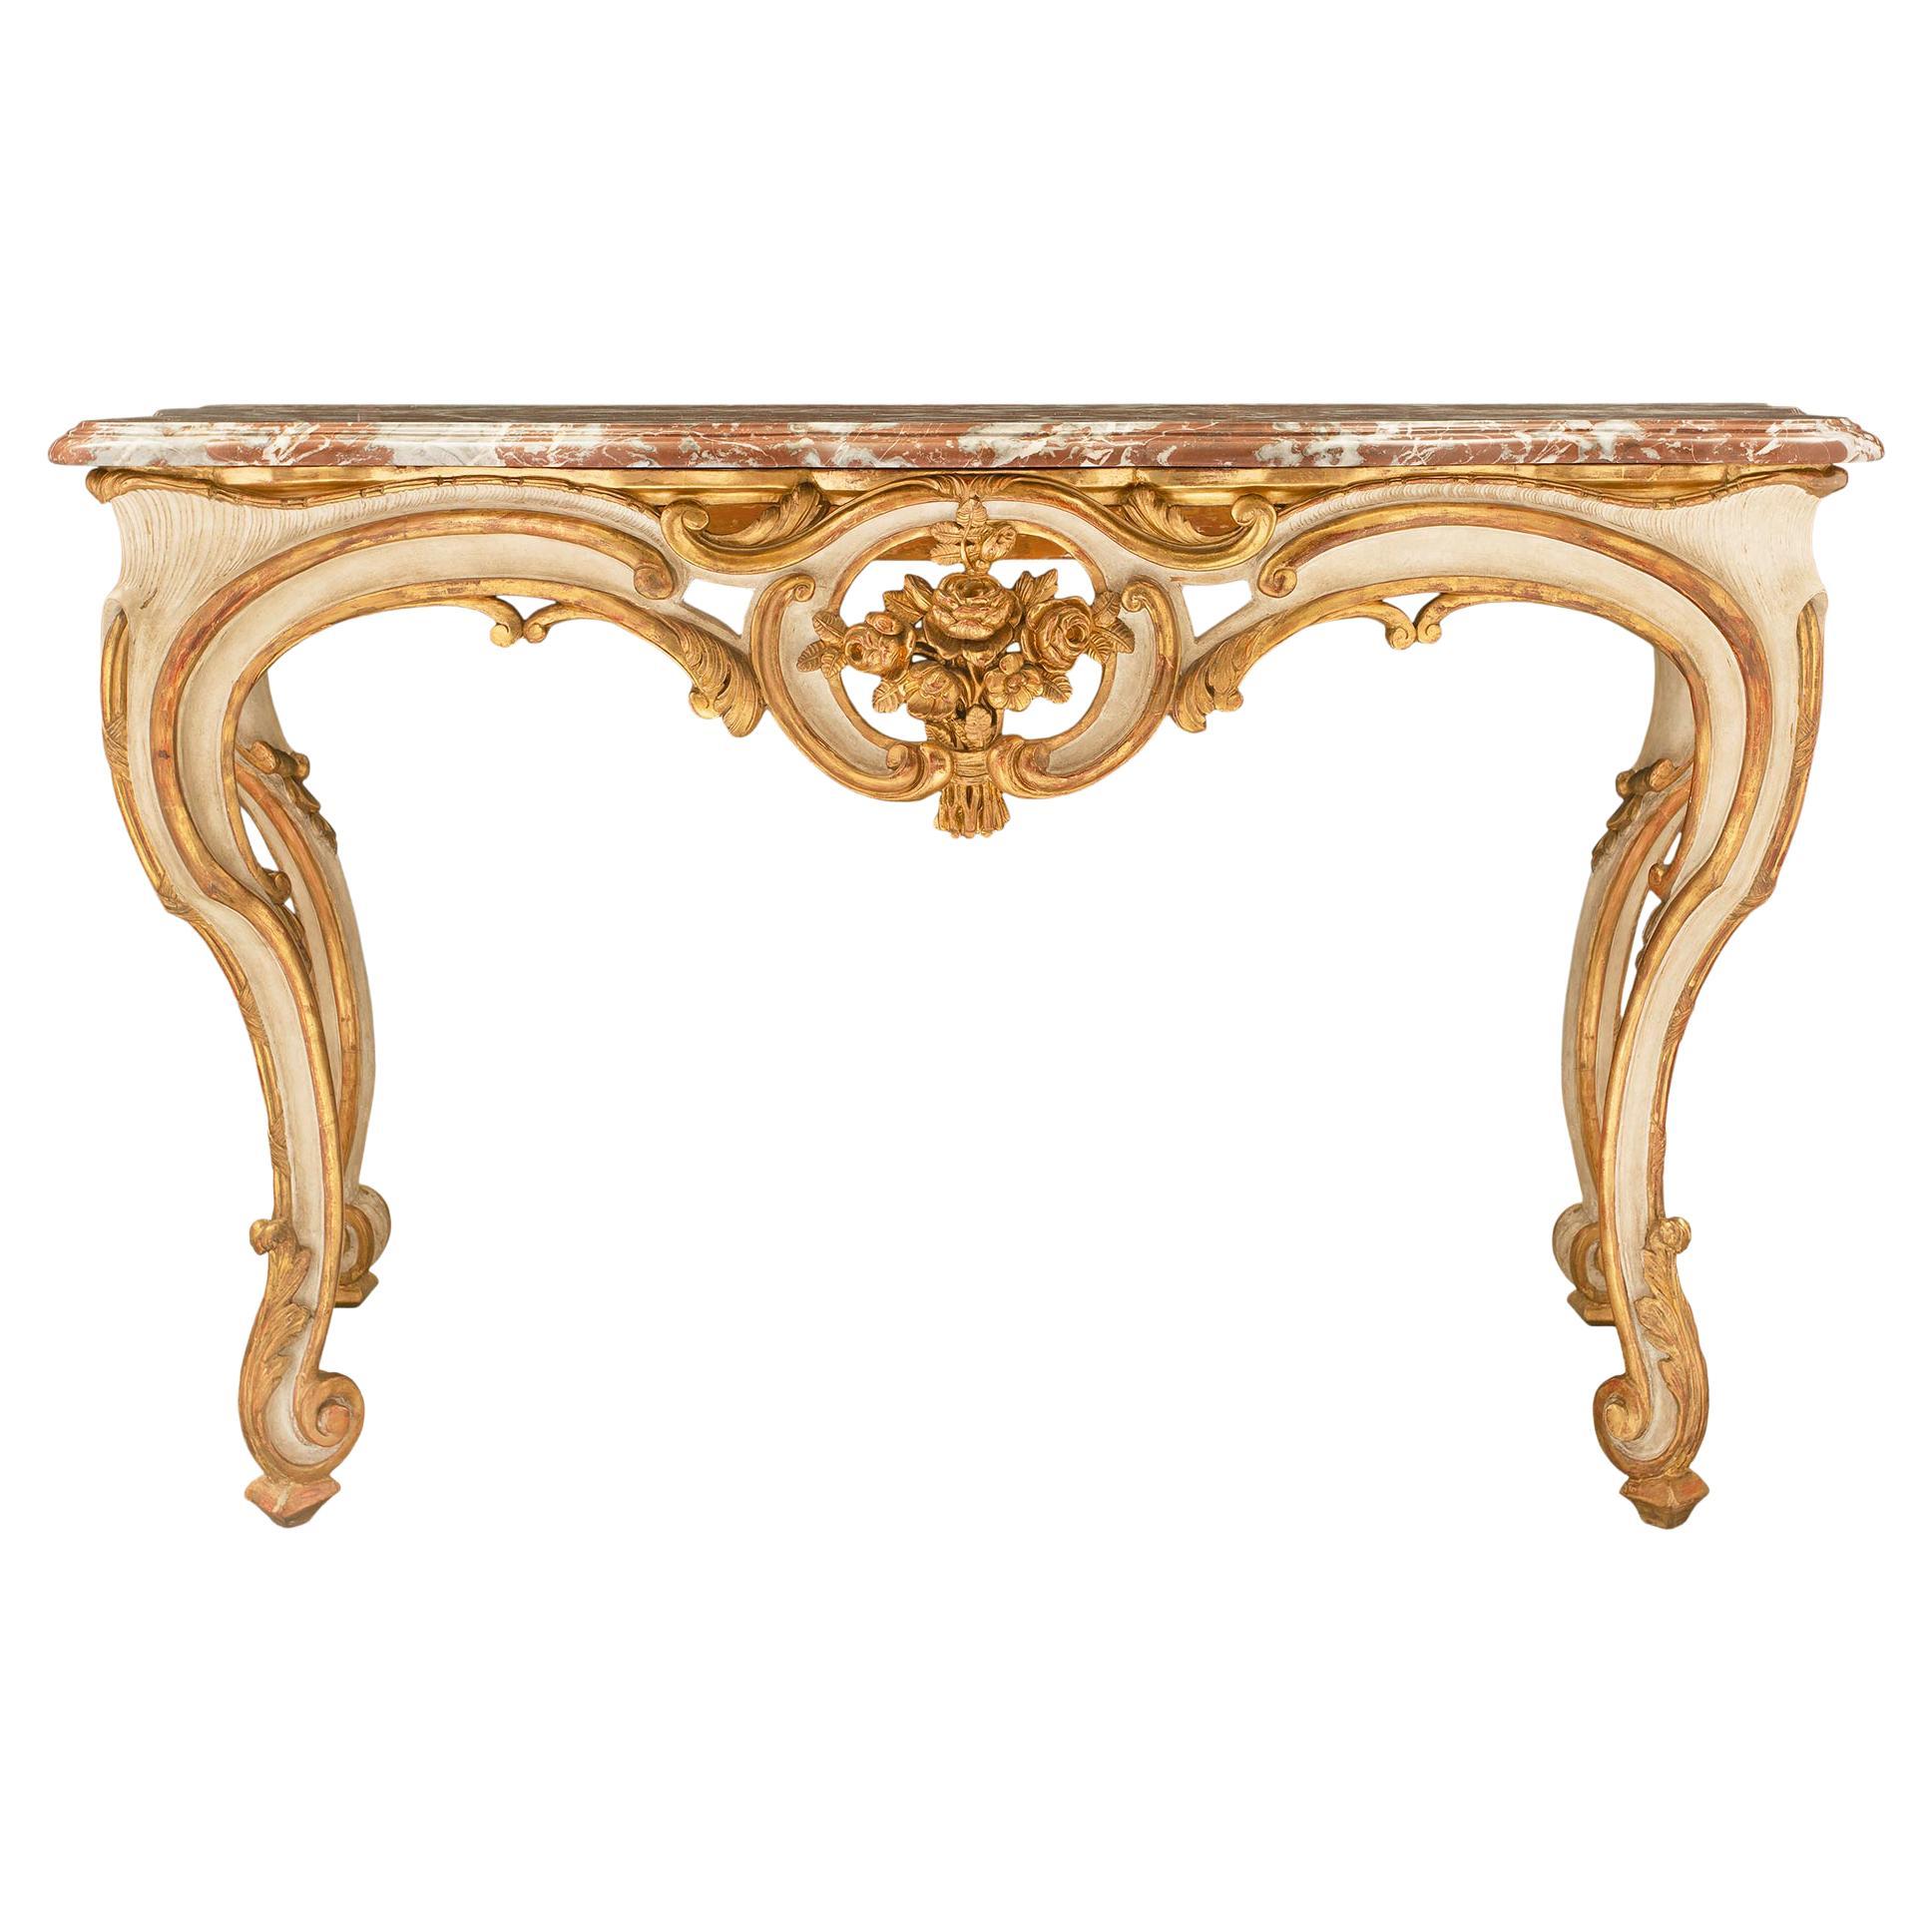  French 18th Century Louis XV Period Patinated, Gilt and Marble Console